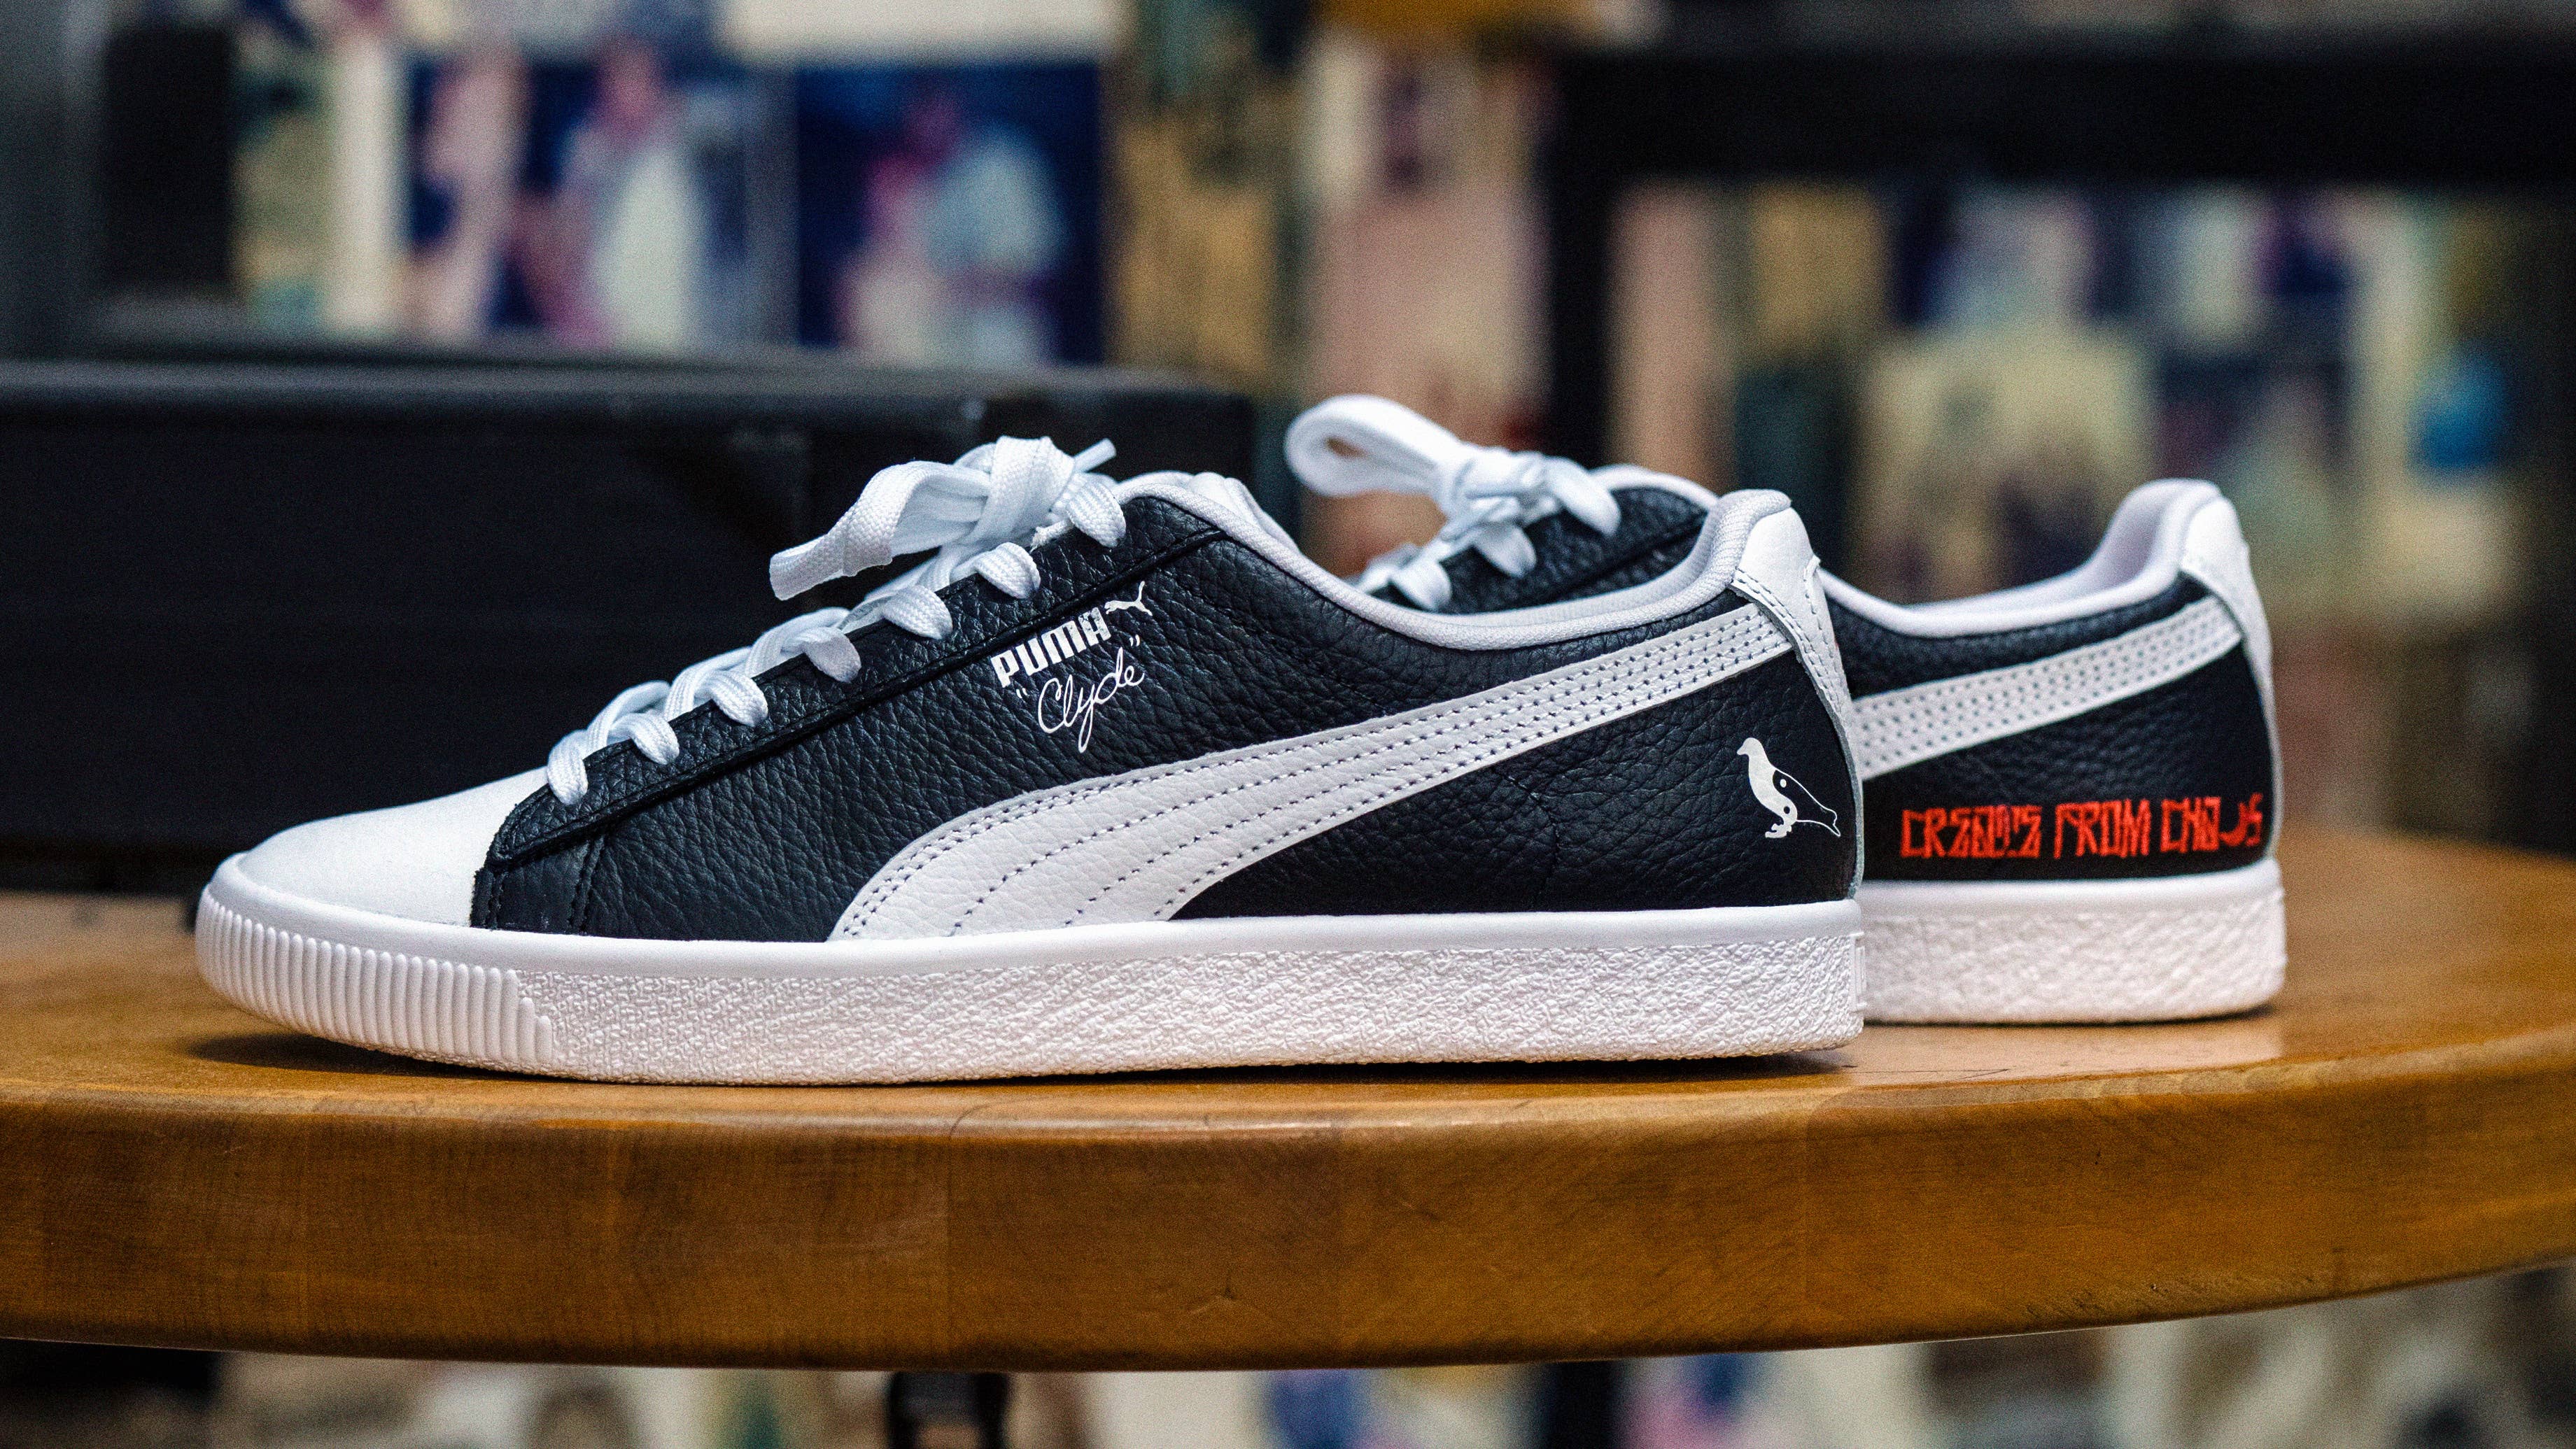 Jeff Staple x Puma Clyde 'Create from Chaos 2'